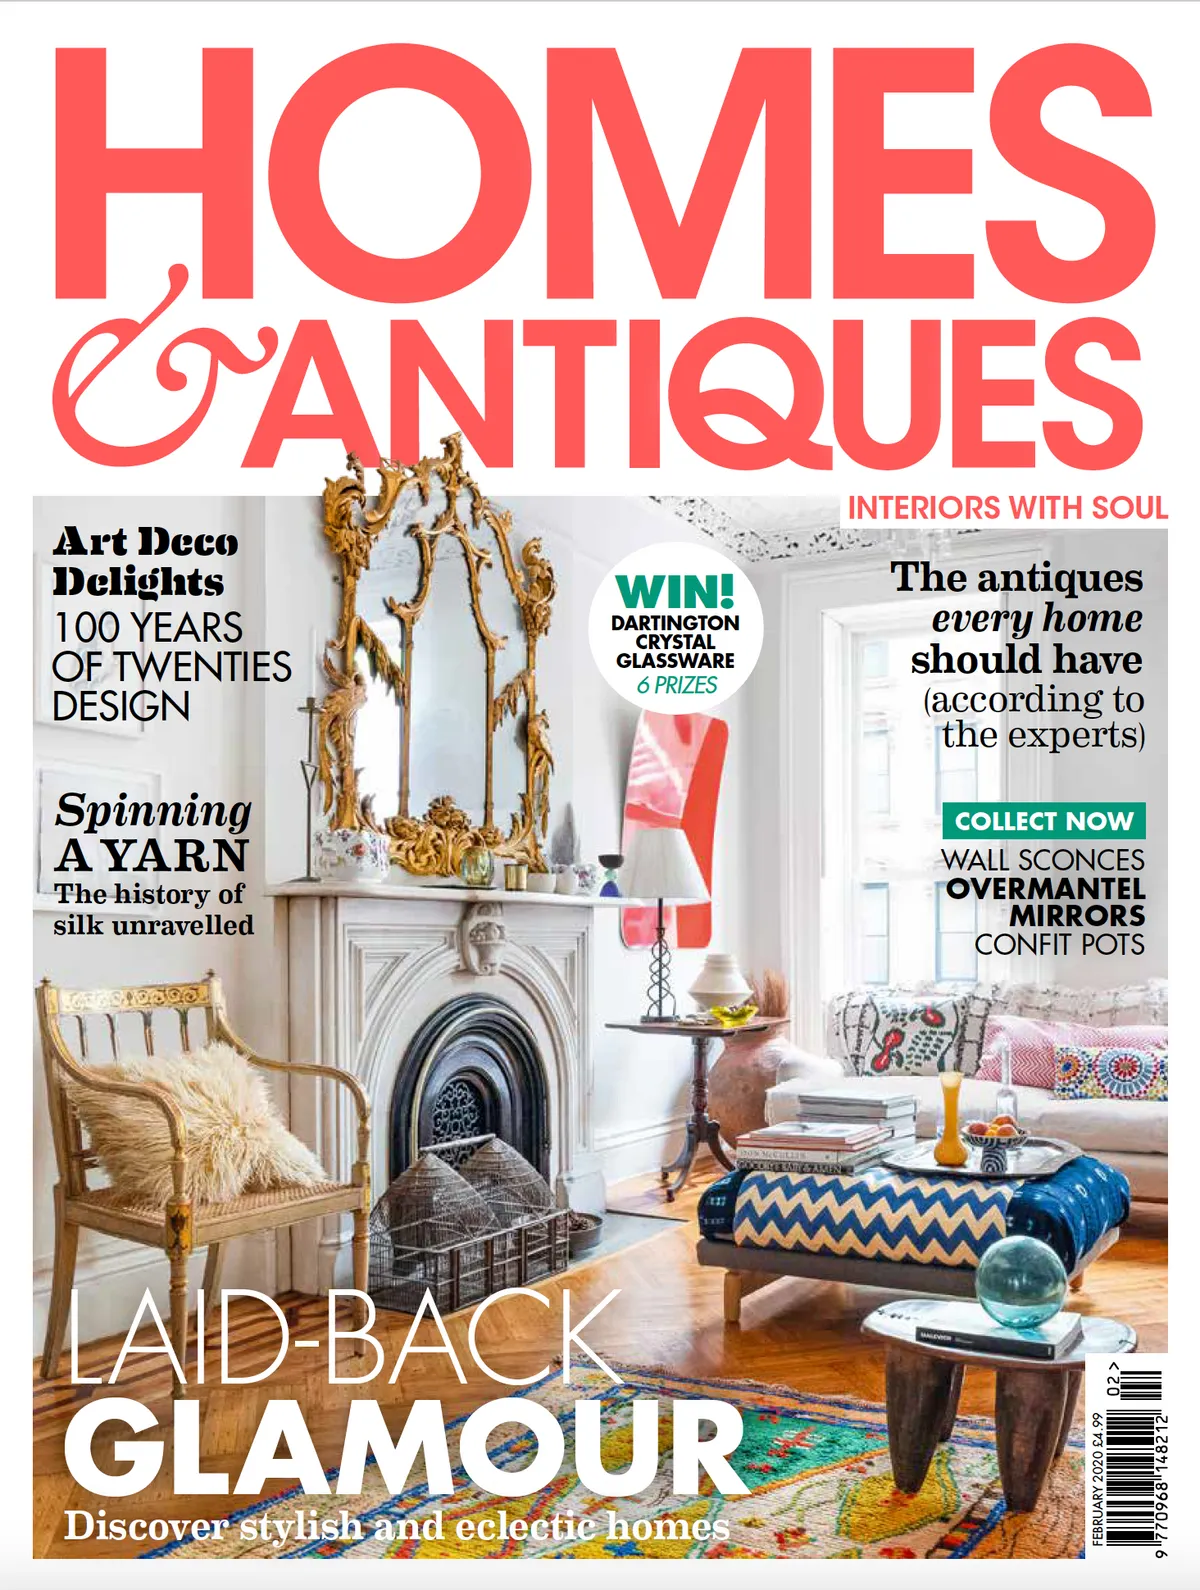 Homes & Antiques February 2020 issue